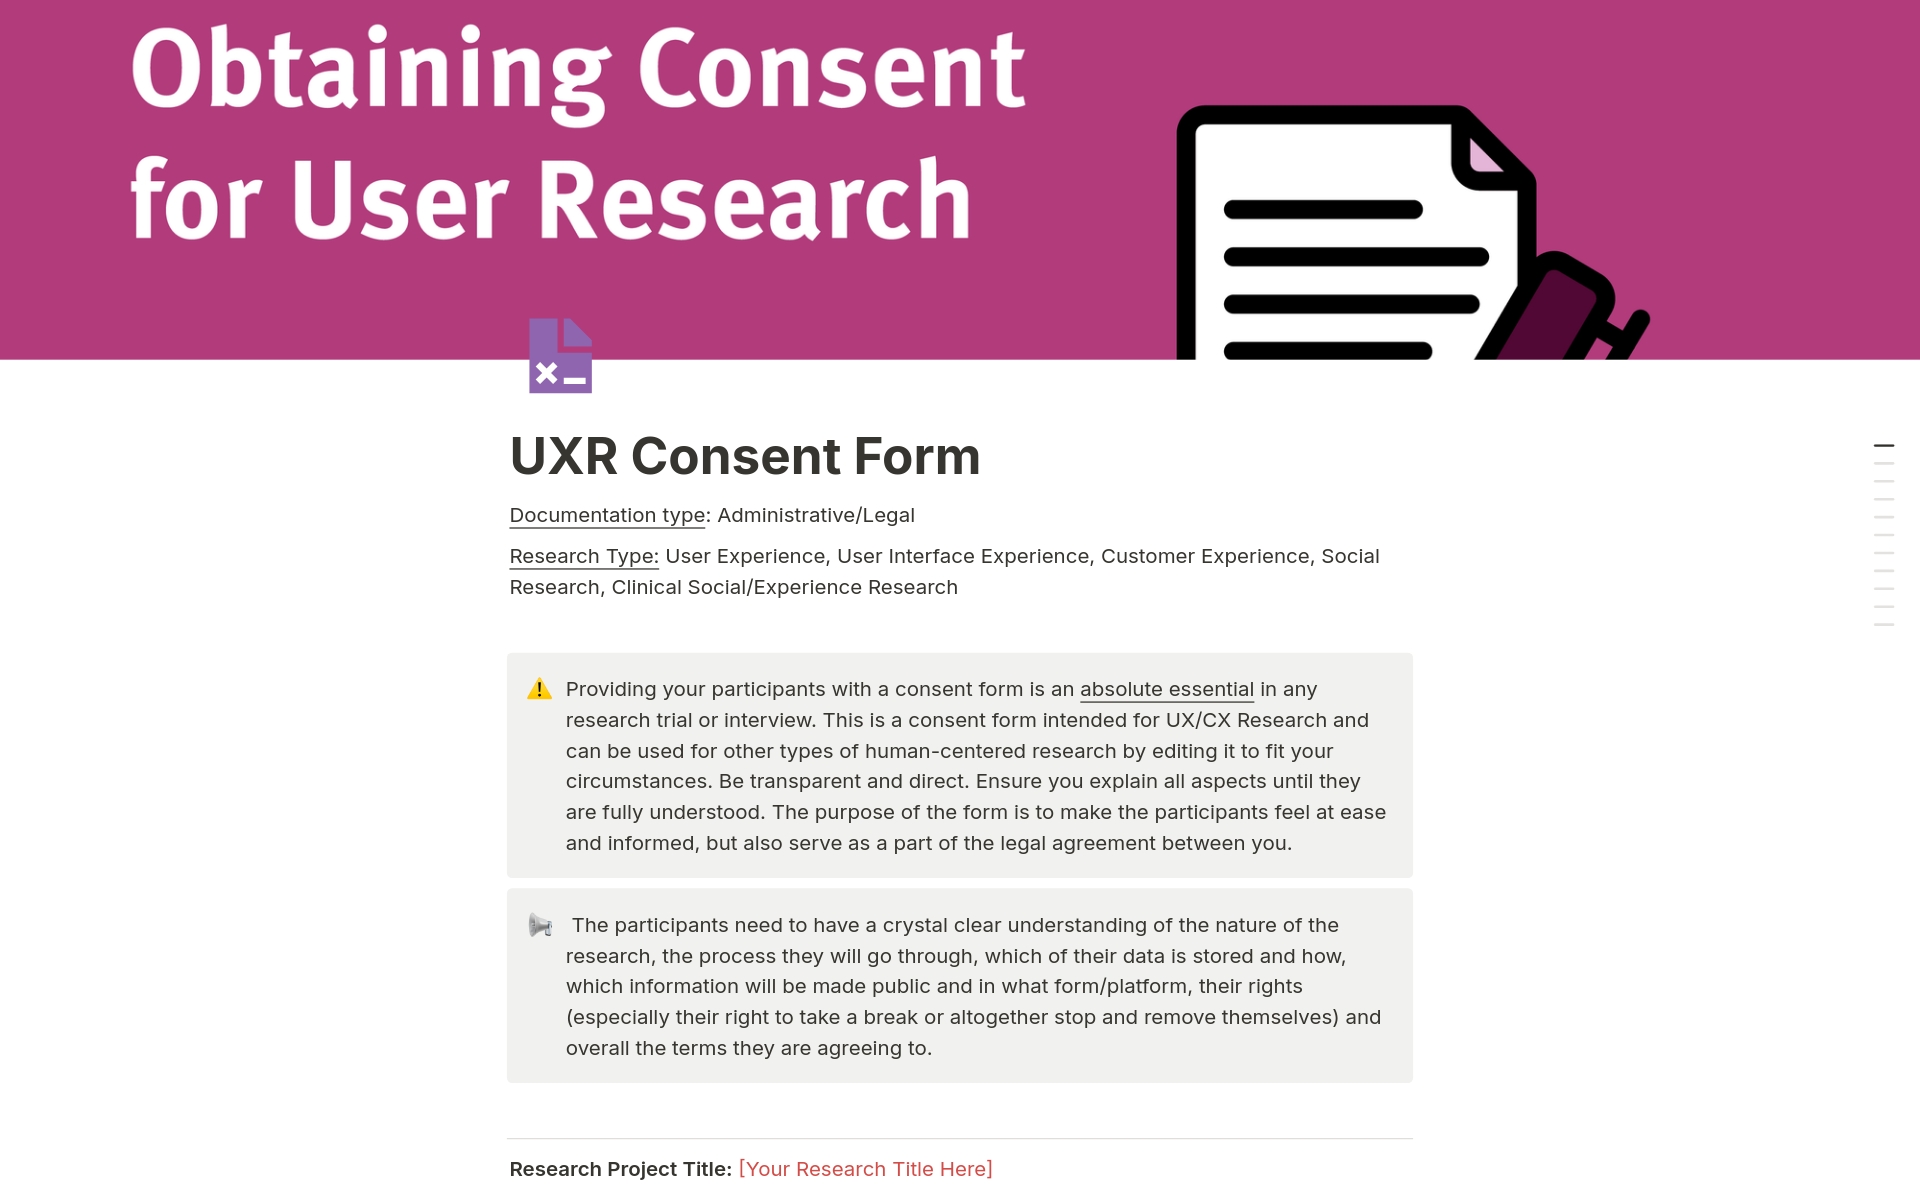 A UXR Consent Form Template with practical tips